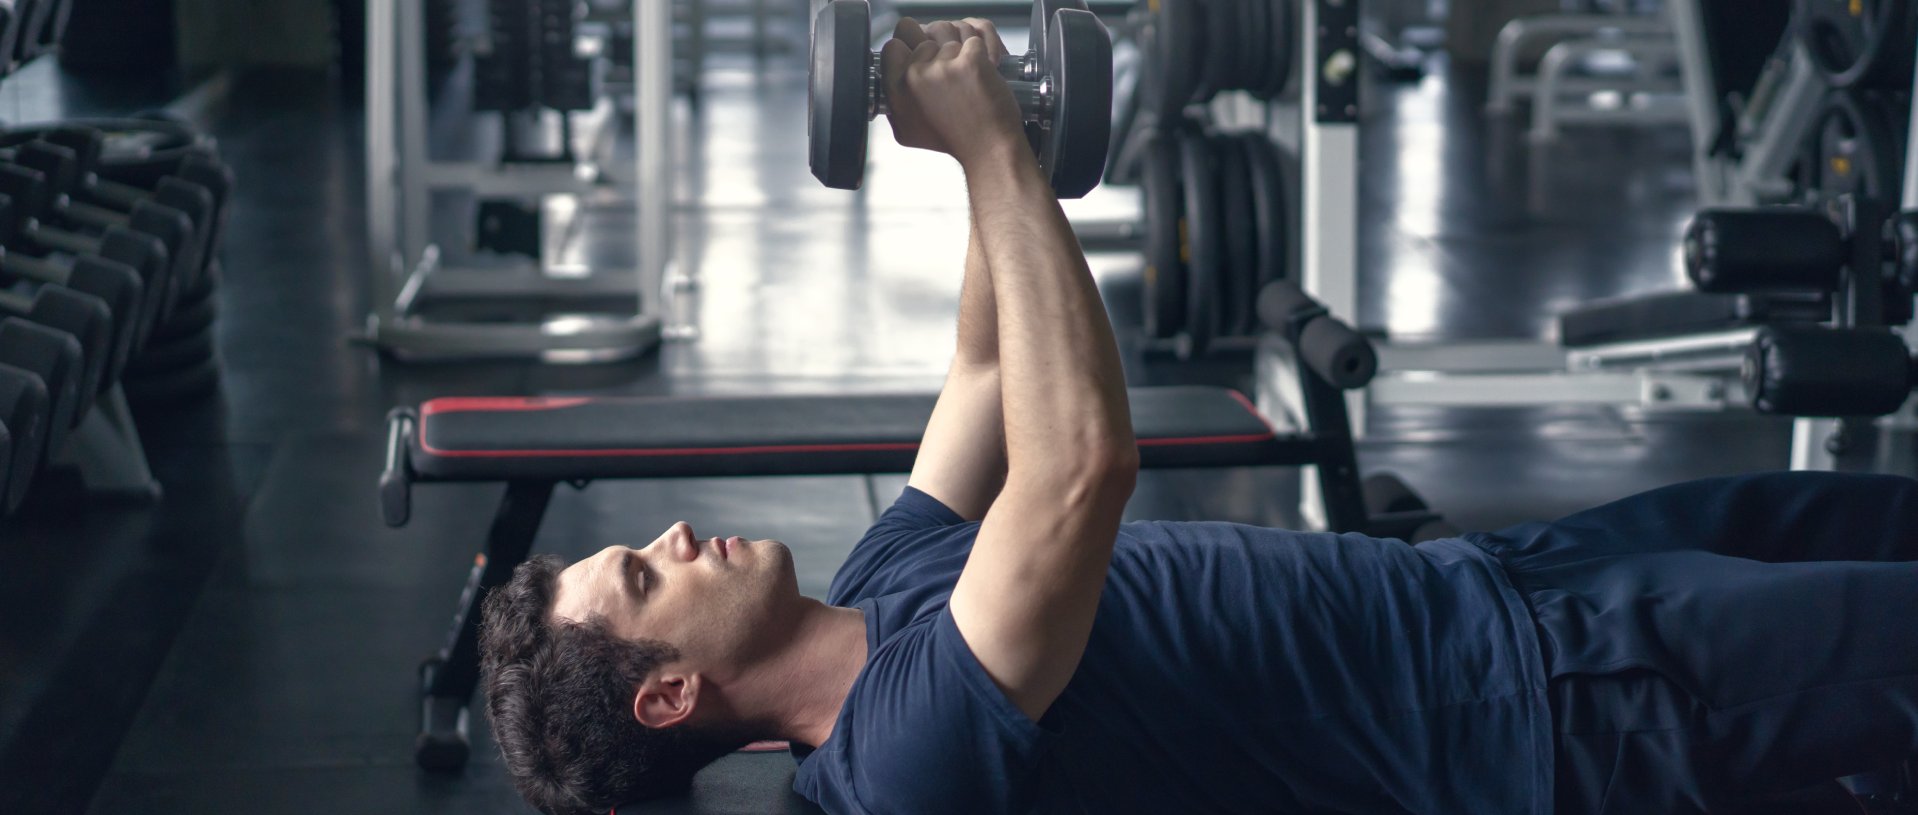 working out after gynecomastia surgery